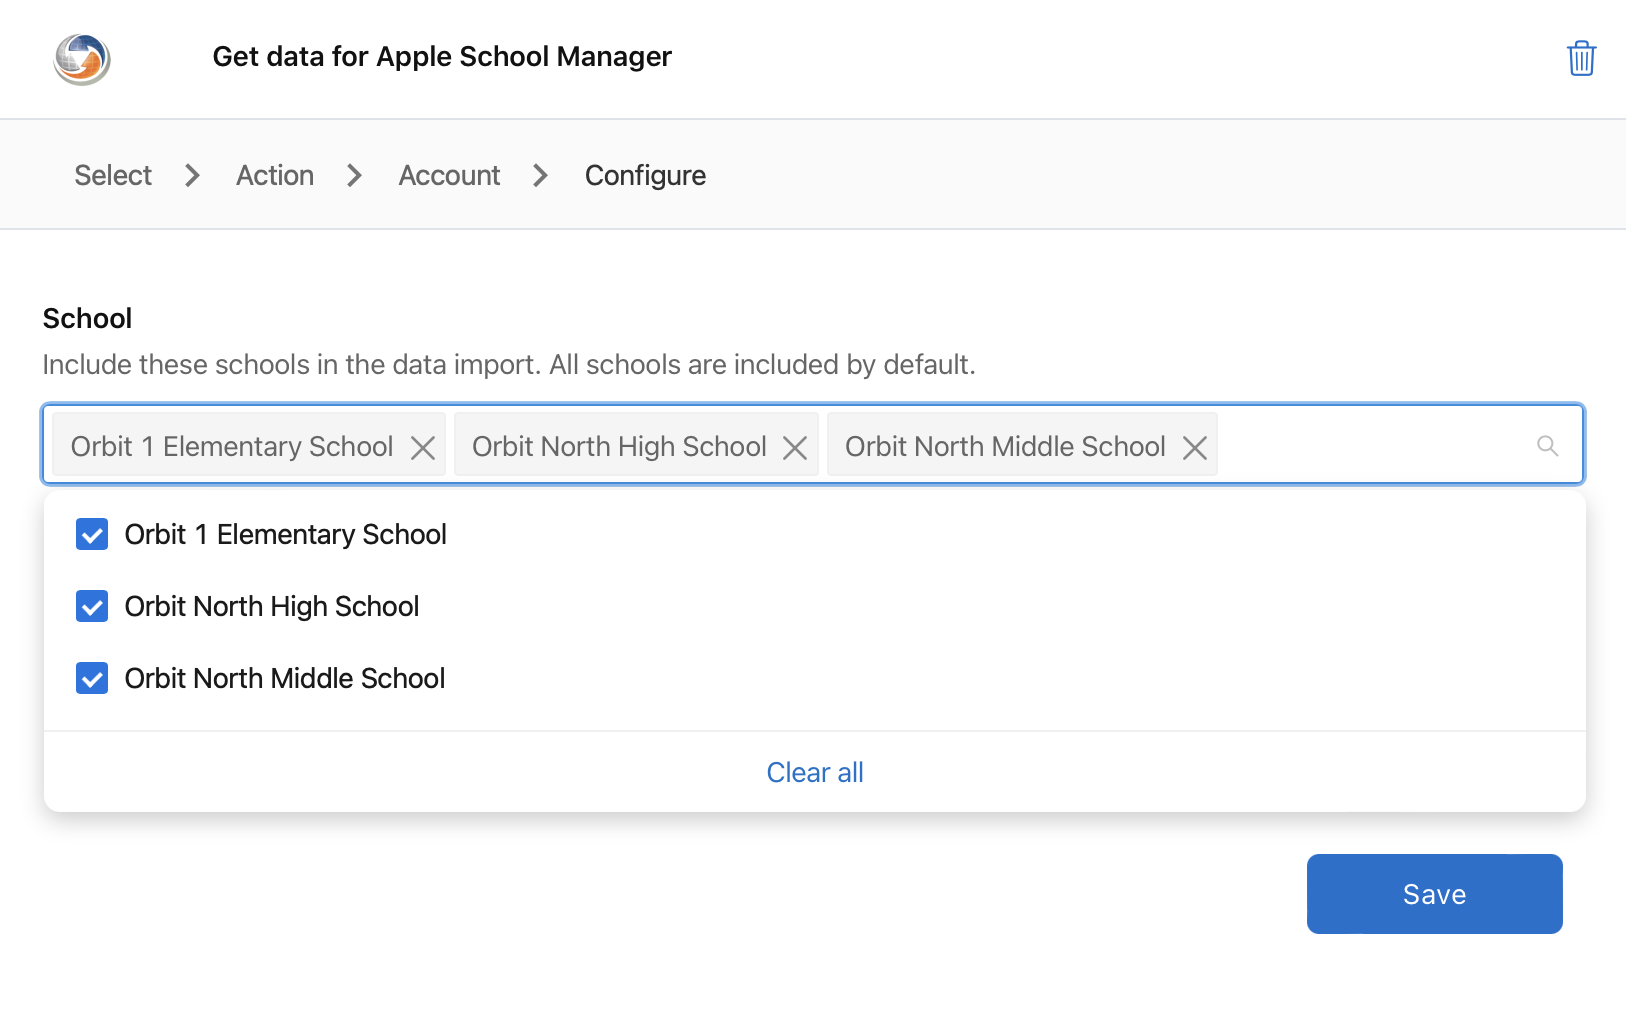 Get data for Apple School Manager, filter by school